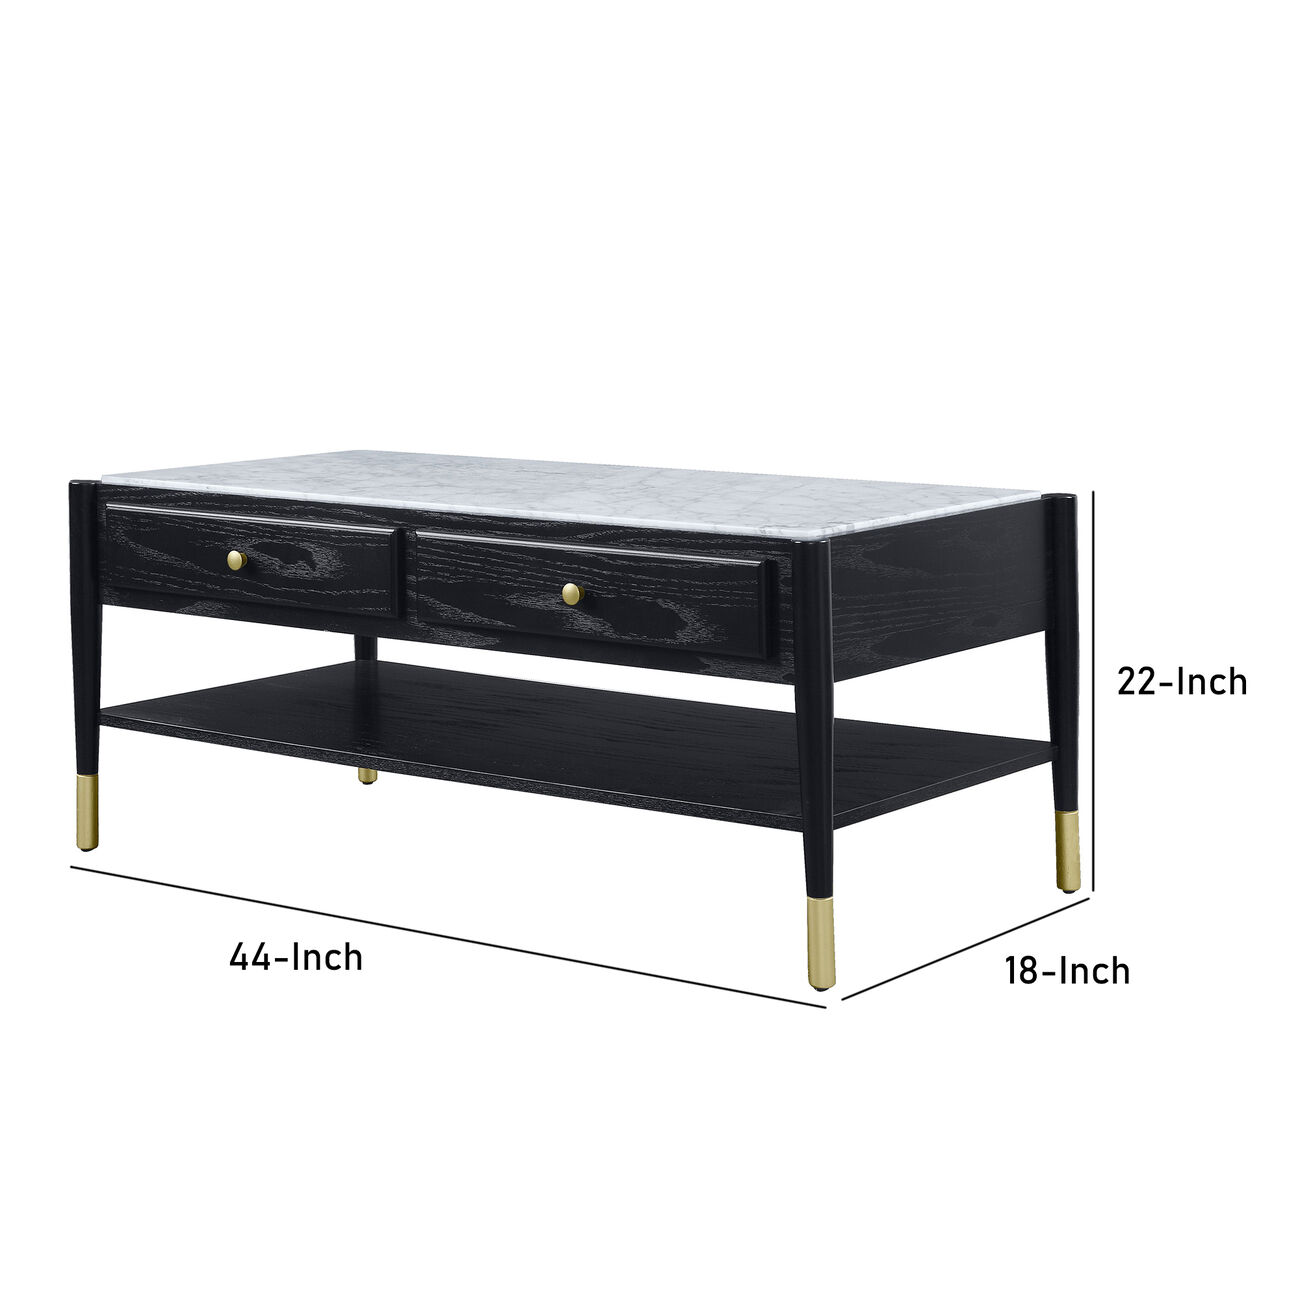 Marble Top Coffee Table with 2 Drawers and 1 Bottom Shelf, Black and White